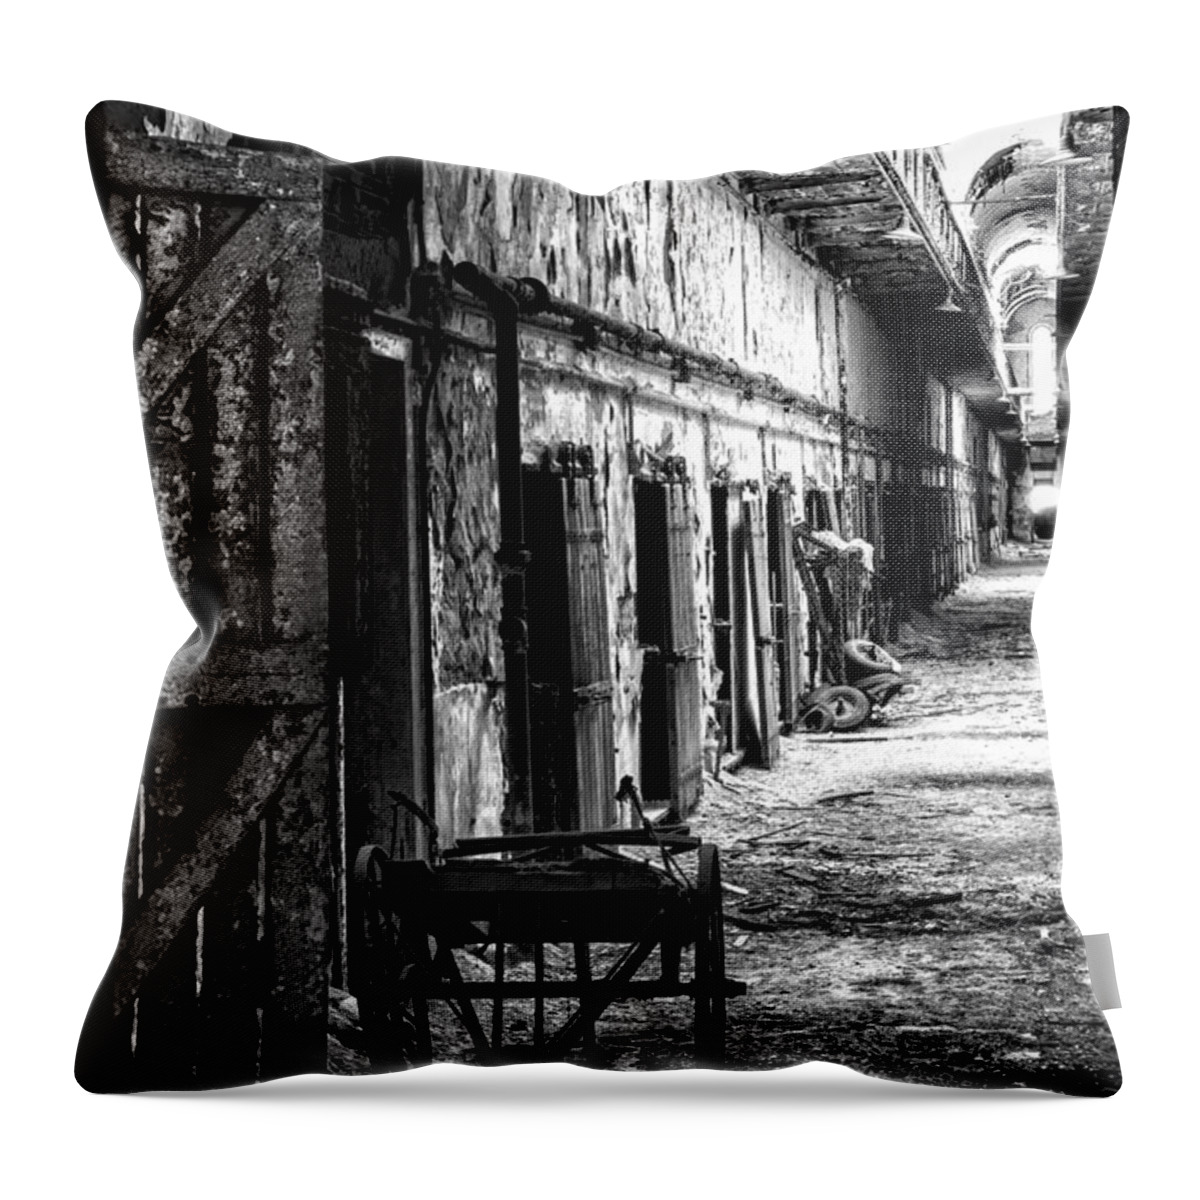 Crystal Yingling Throw Pillow featuring the photograph Many Souls by Ghostwinds Photography